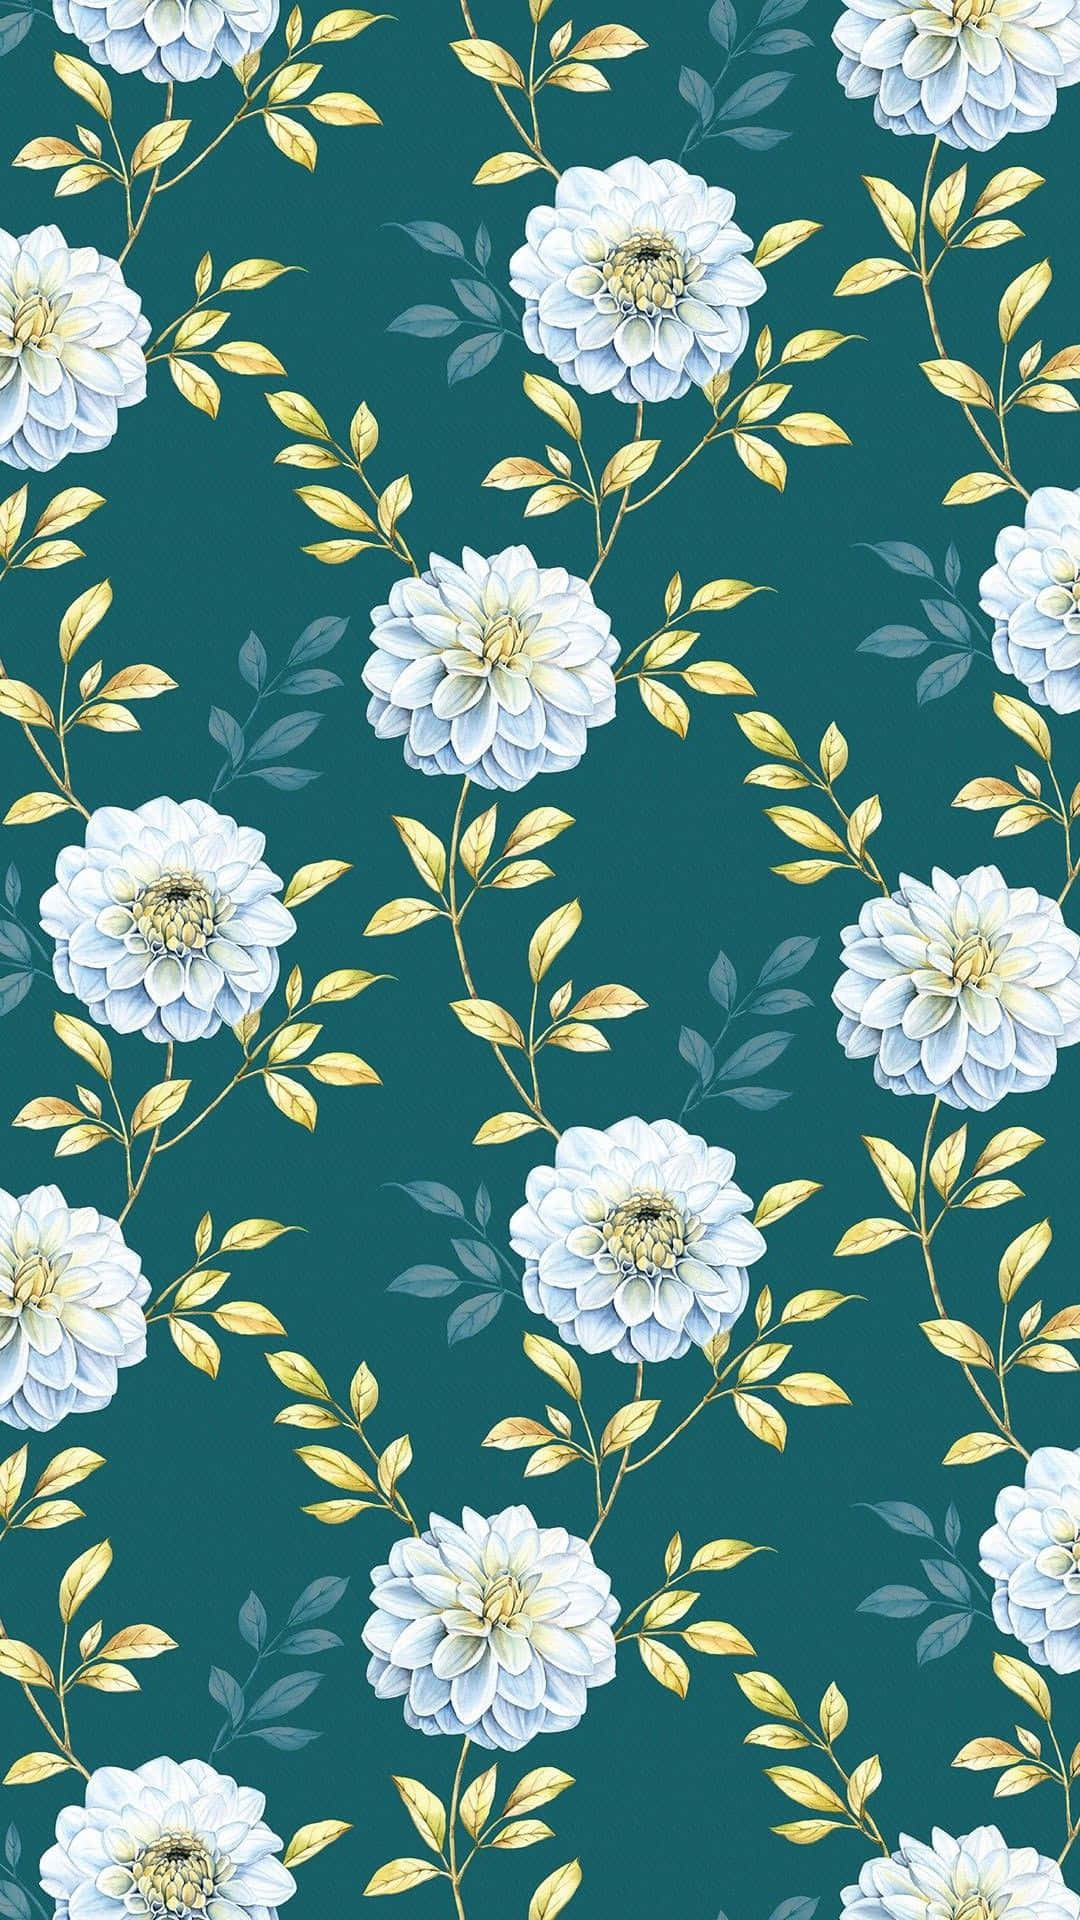 Download A Floral Pattern With White Flowers On A Teal Background ...